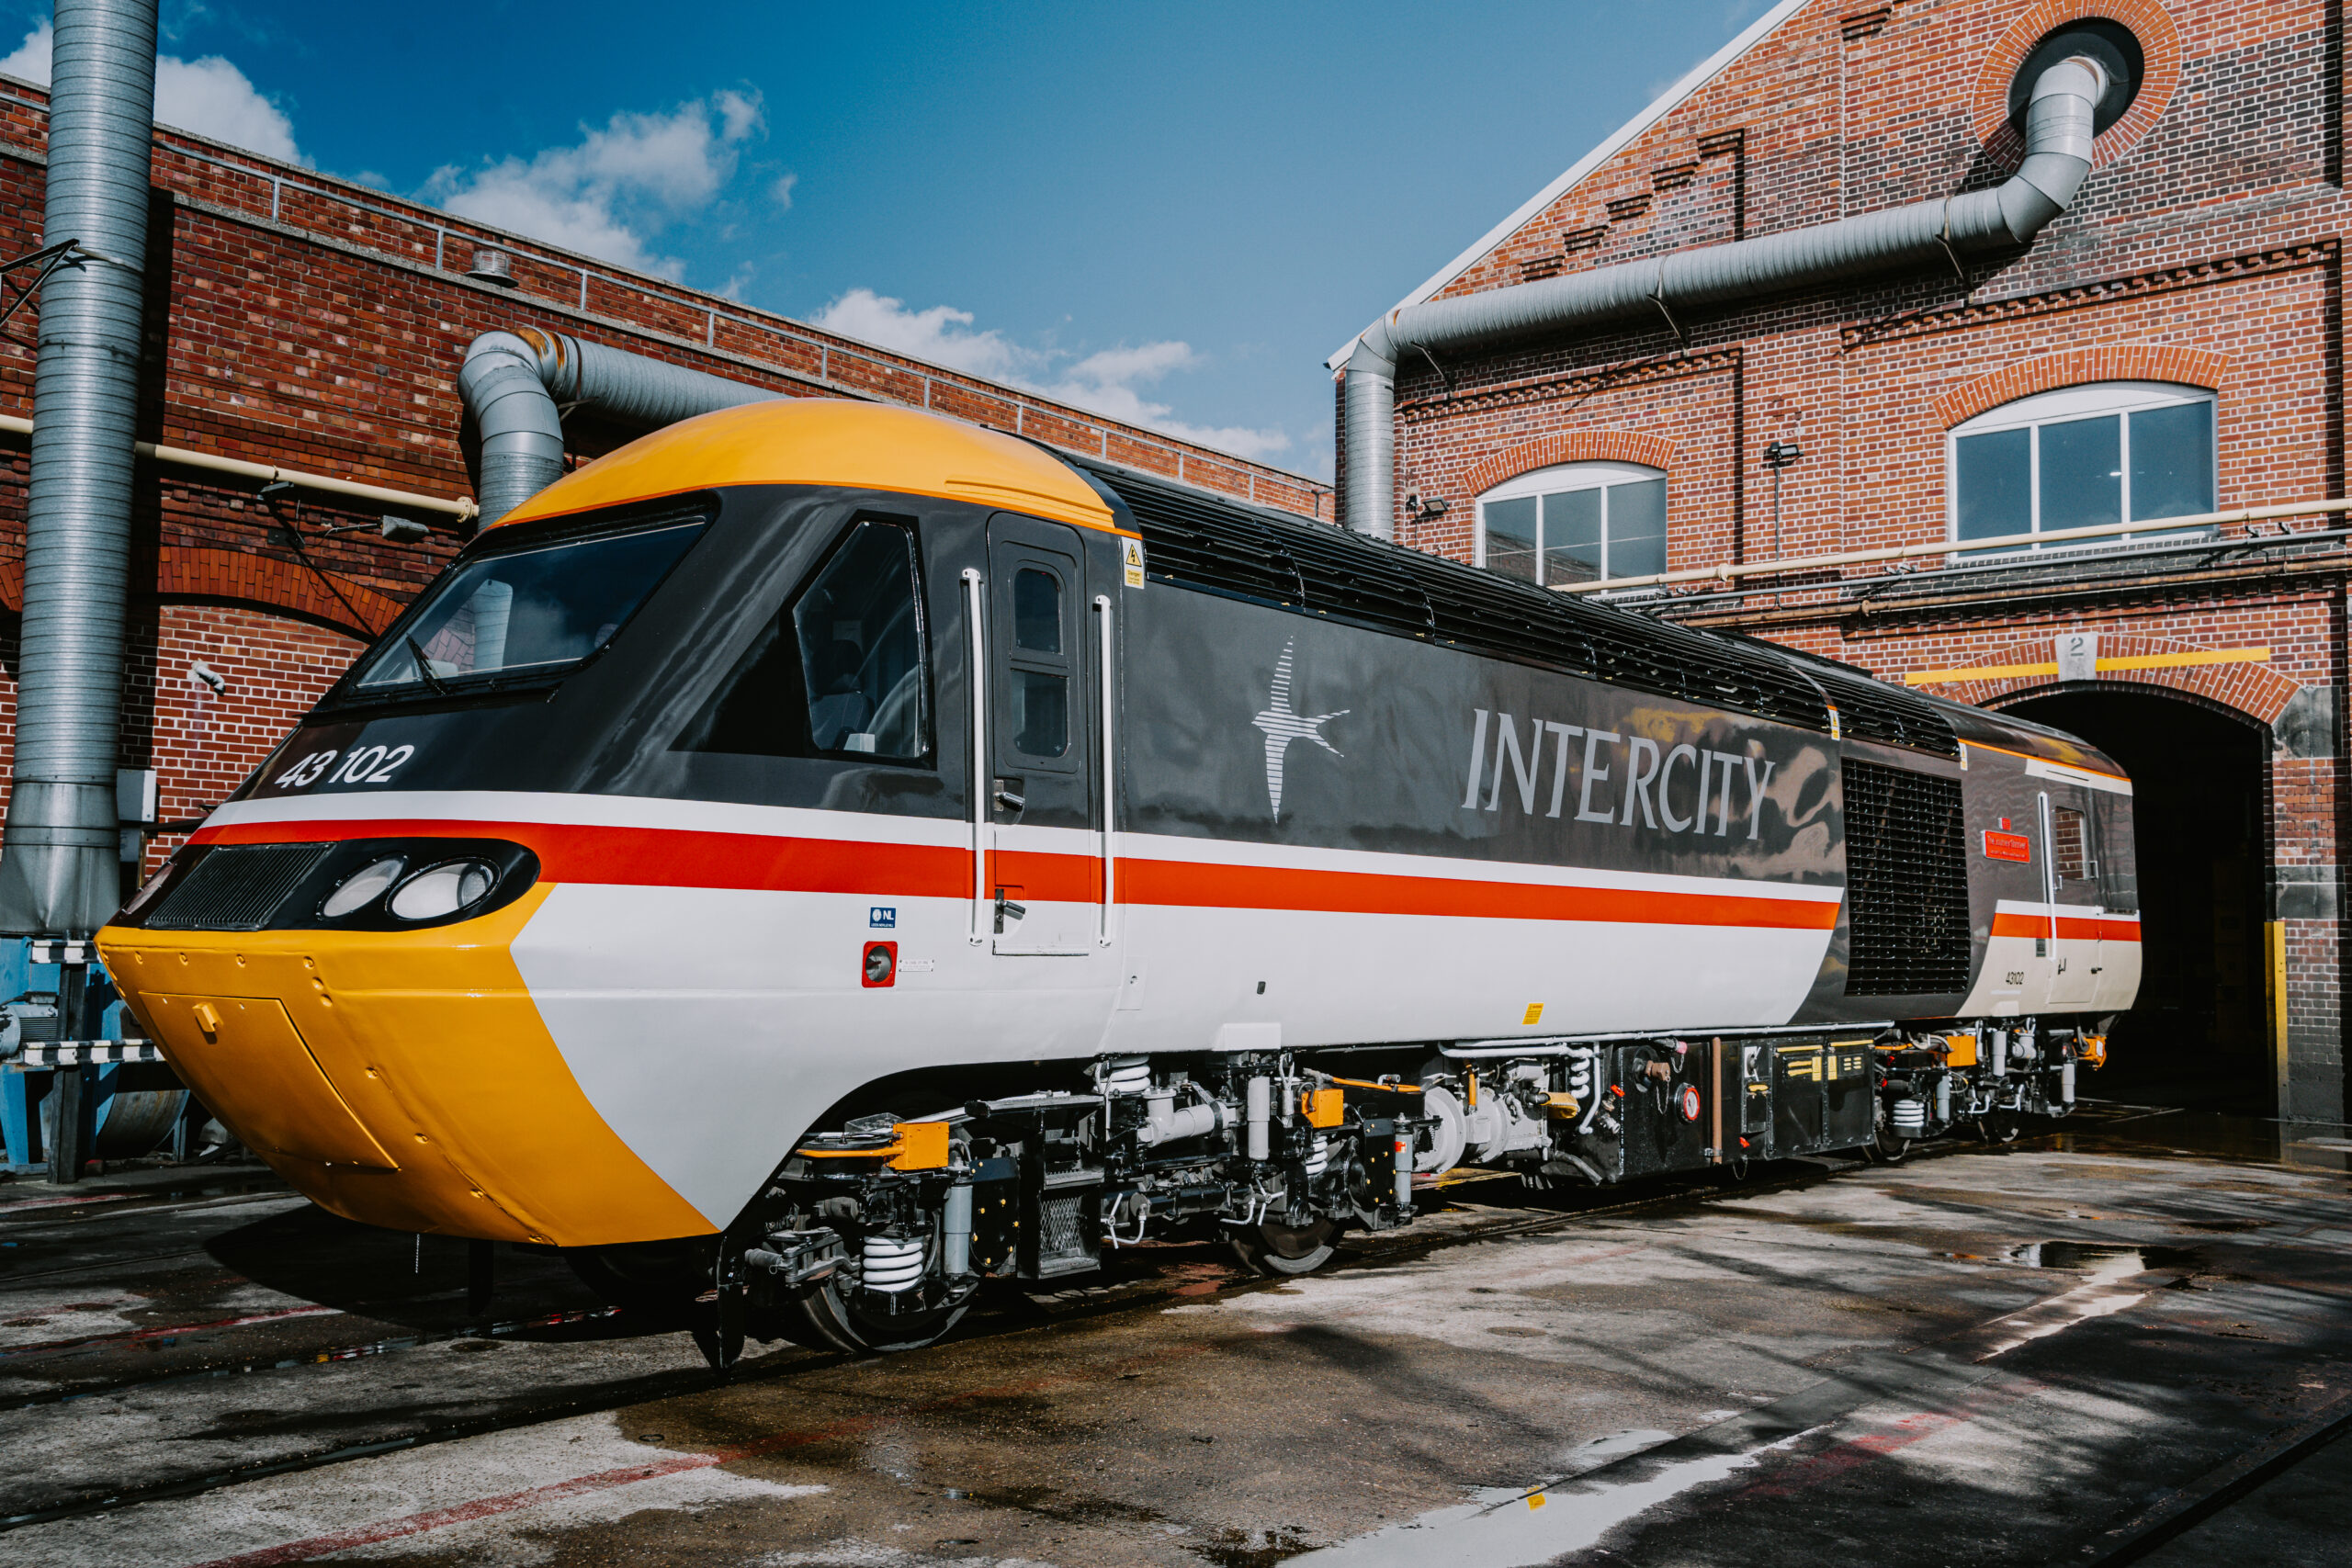 Power car 43102 that broke the intercity world speed record, painted in its original Intercity Swallow livery